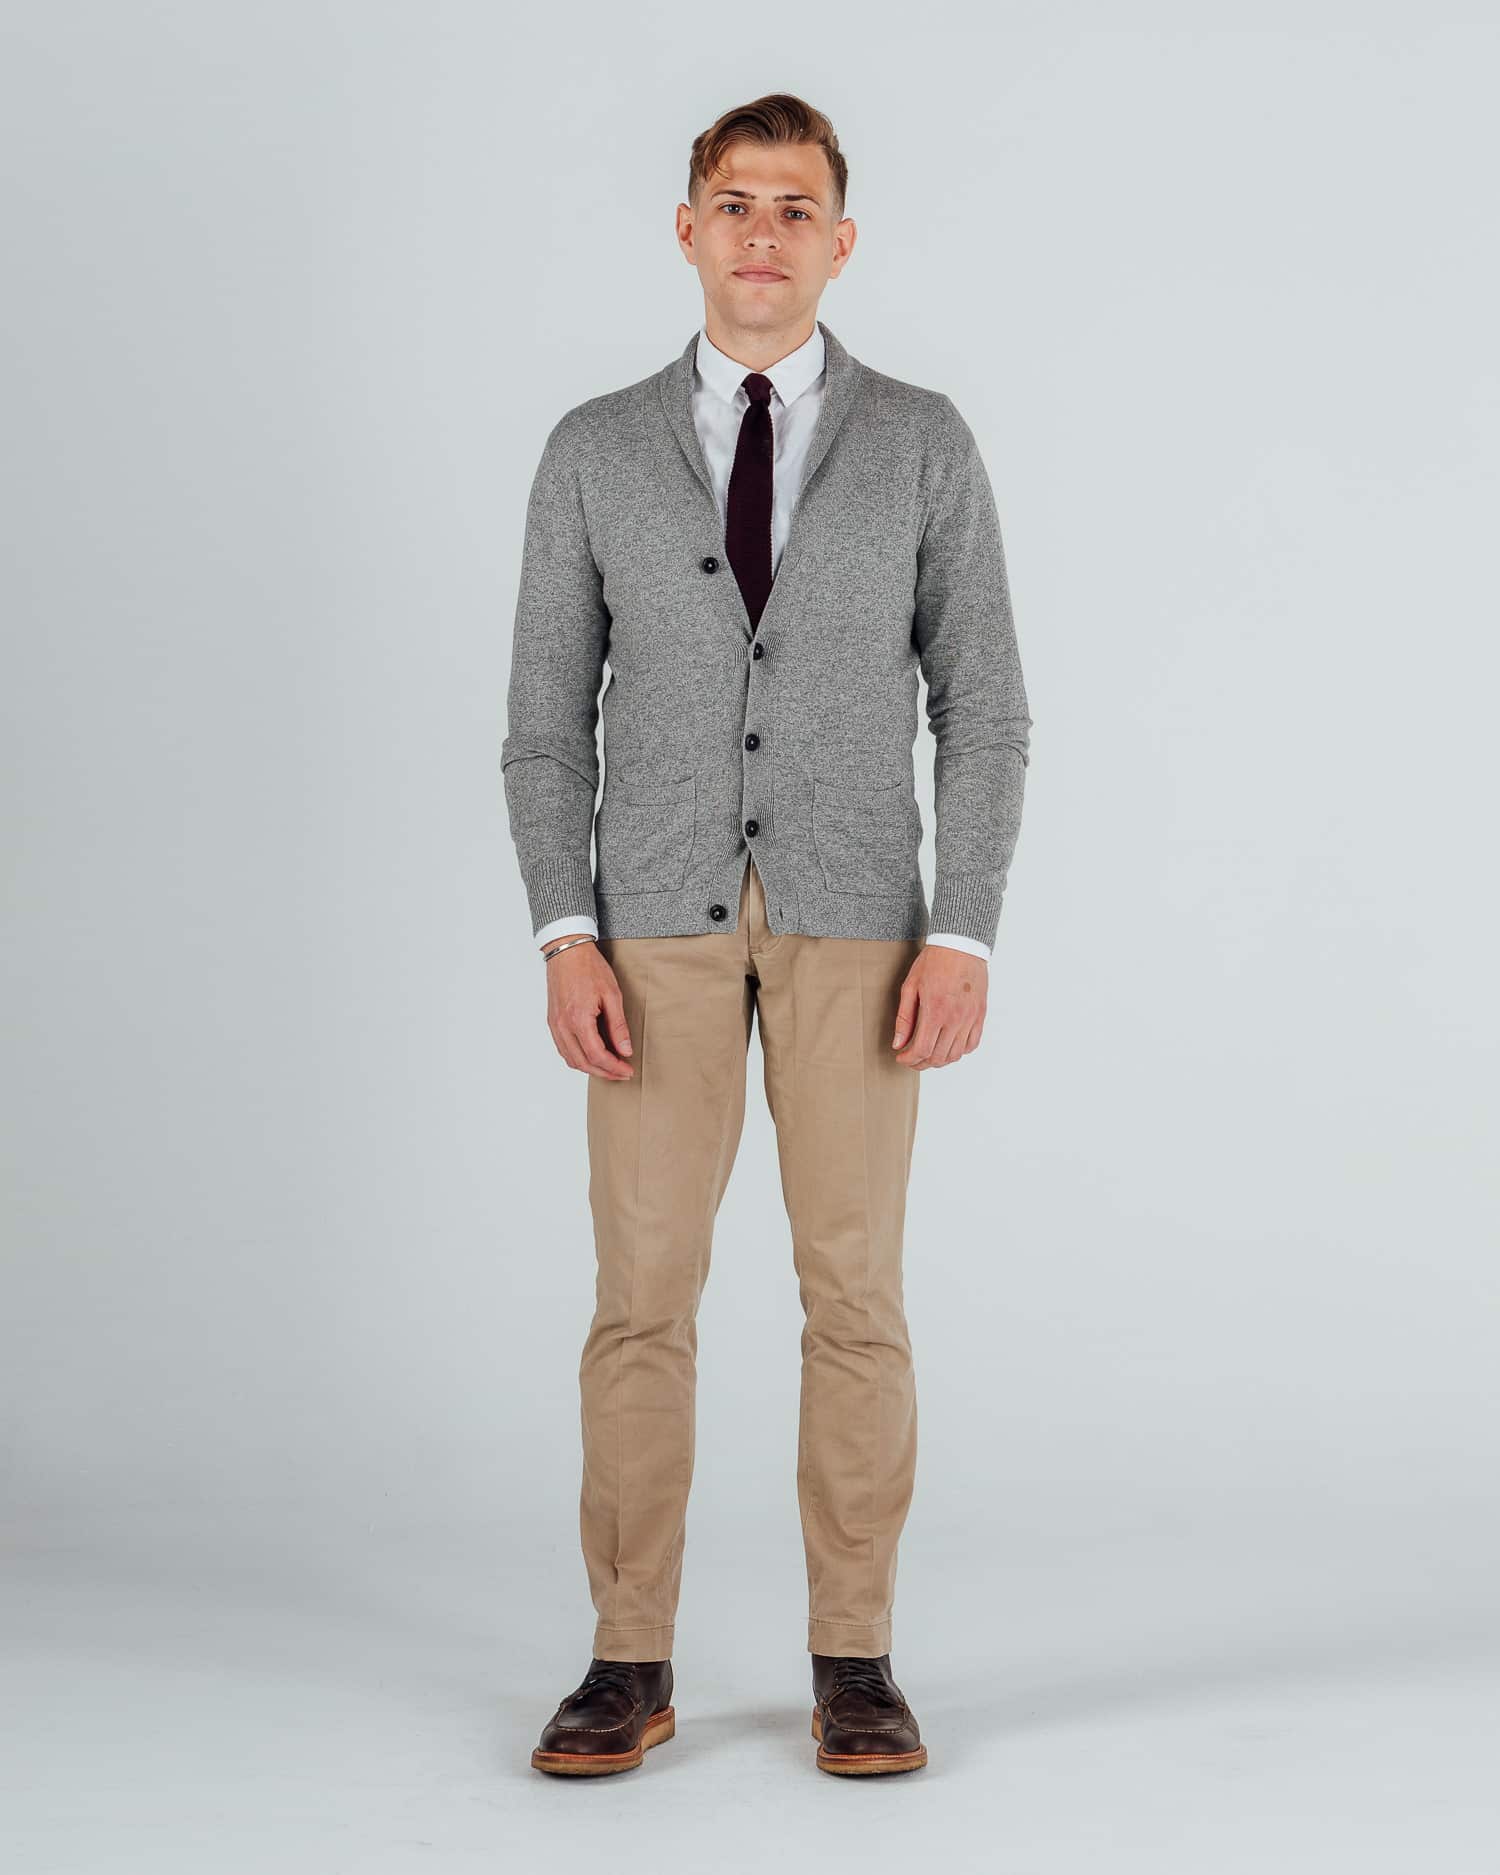 How to wear a grey chino ? - THE NINES